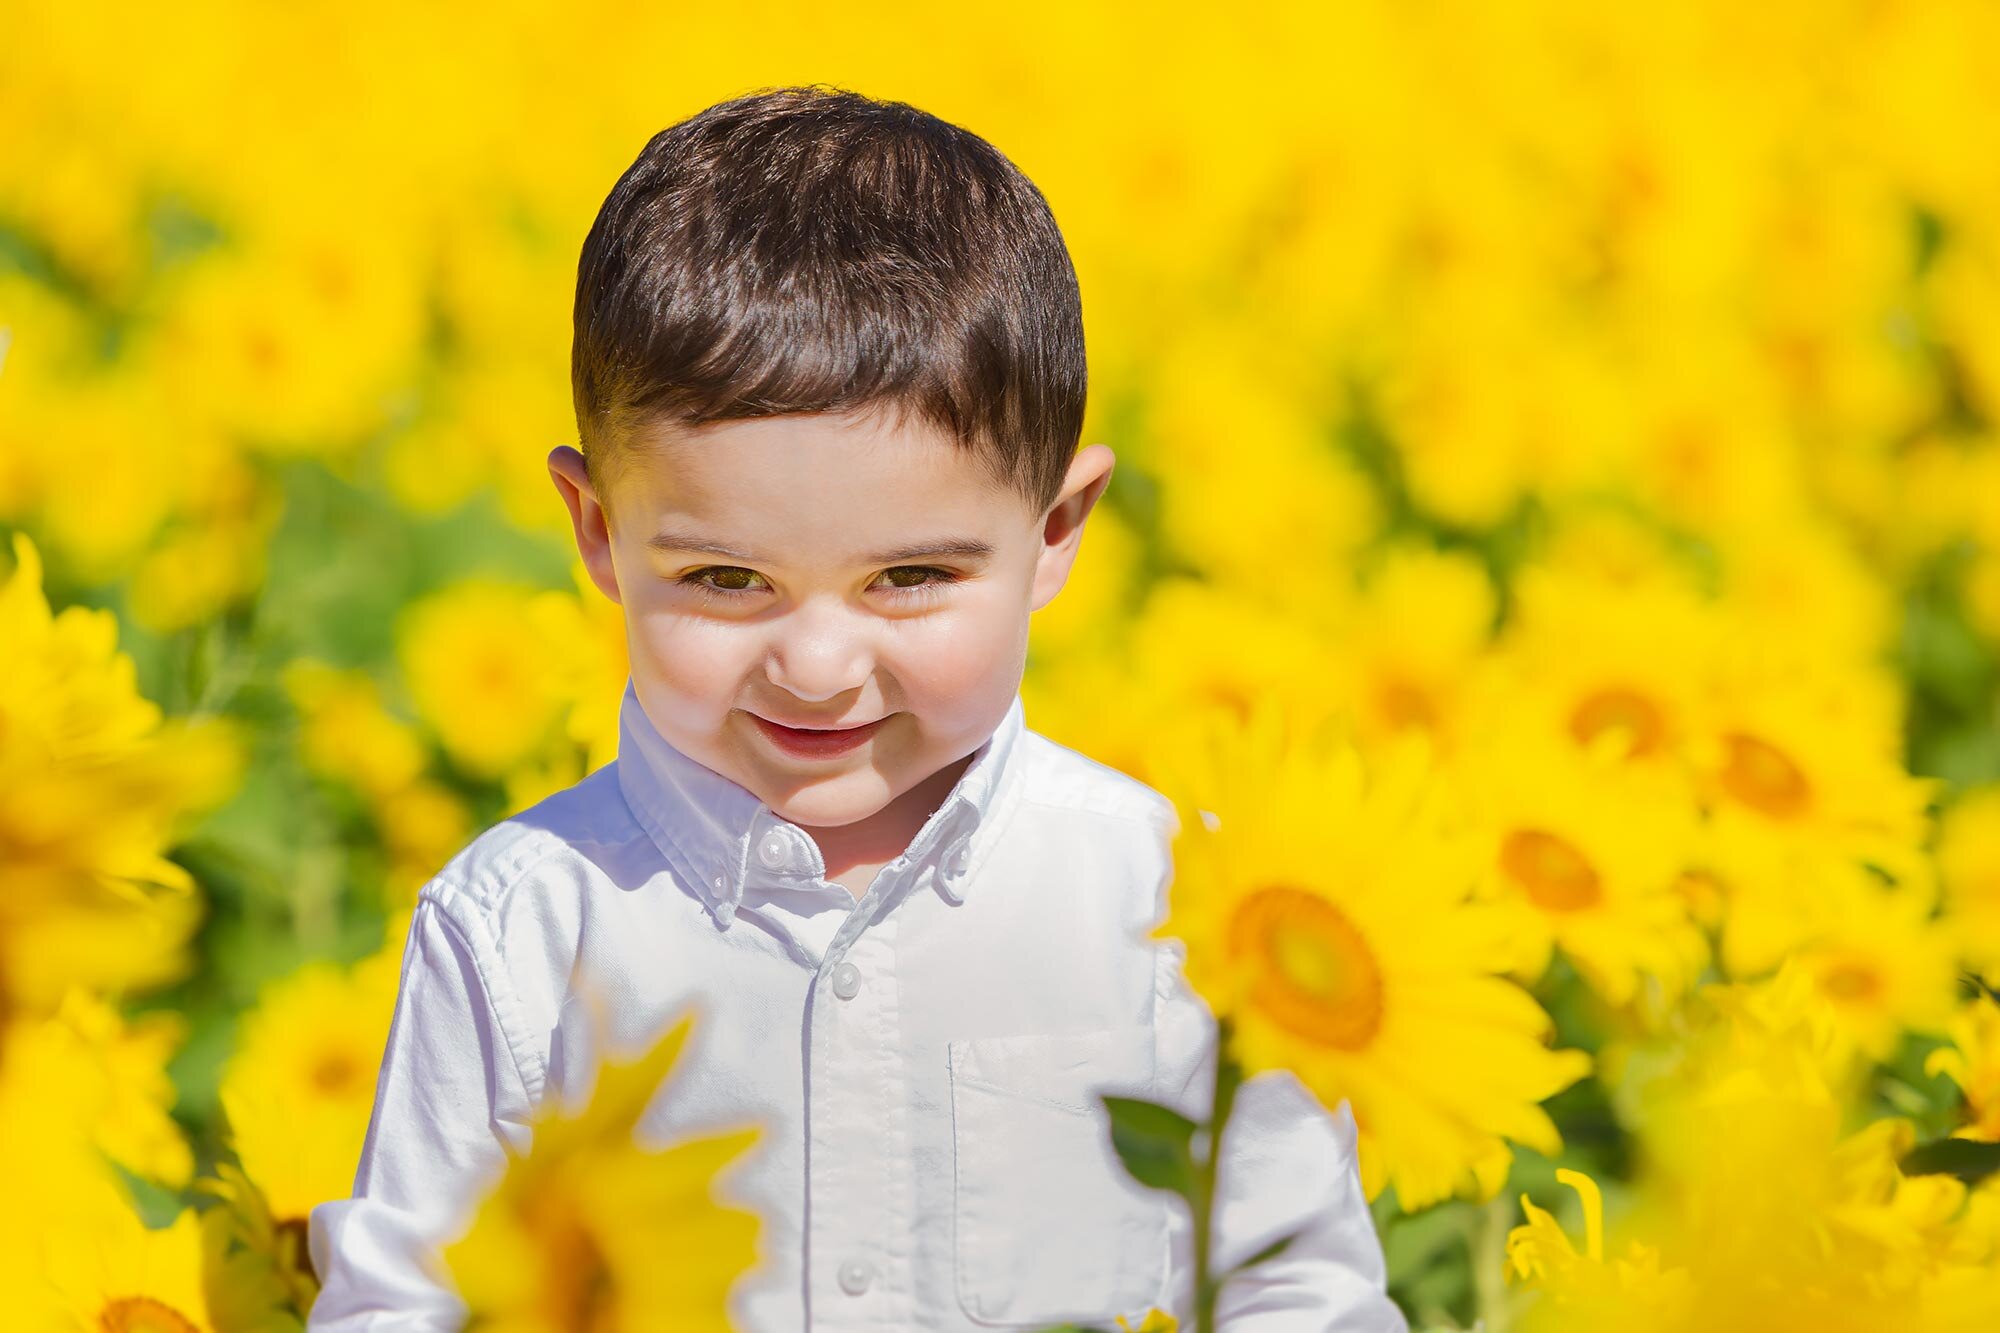 Colby Farm Sunflower Mini Session | Stephen Grant Photography